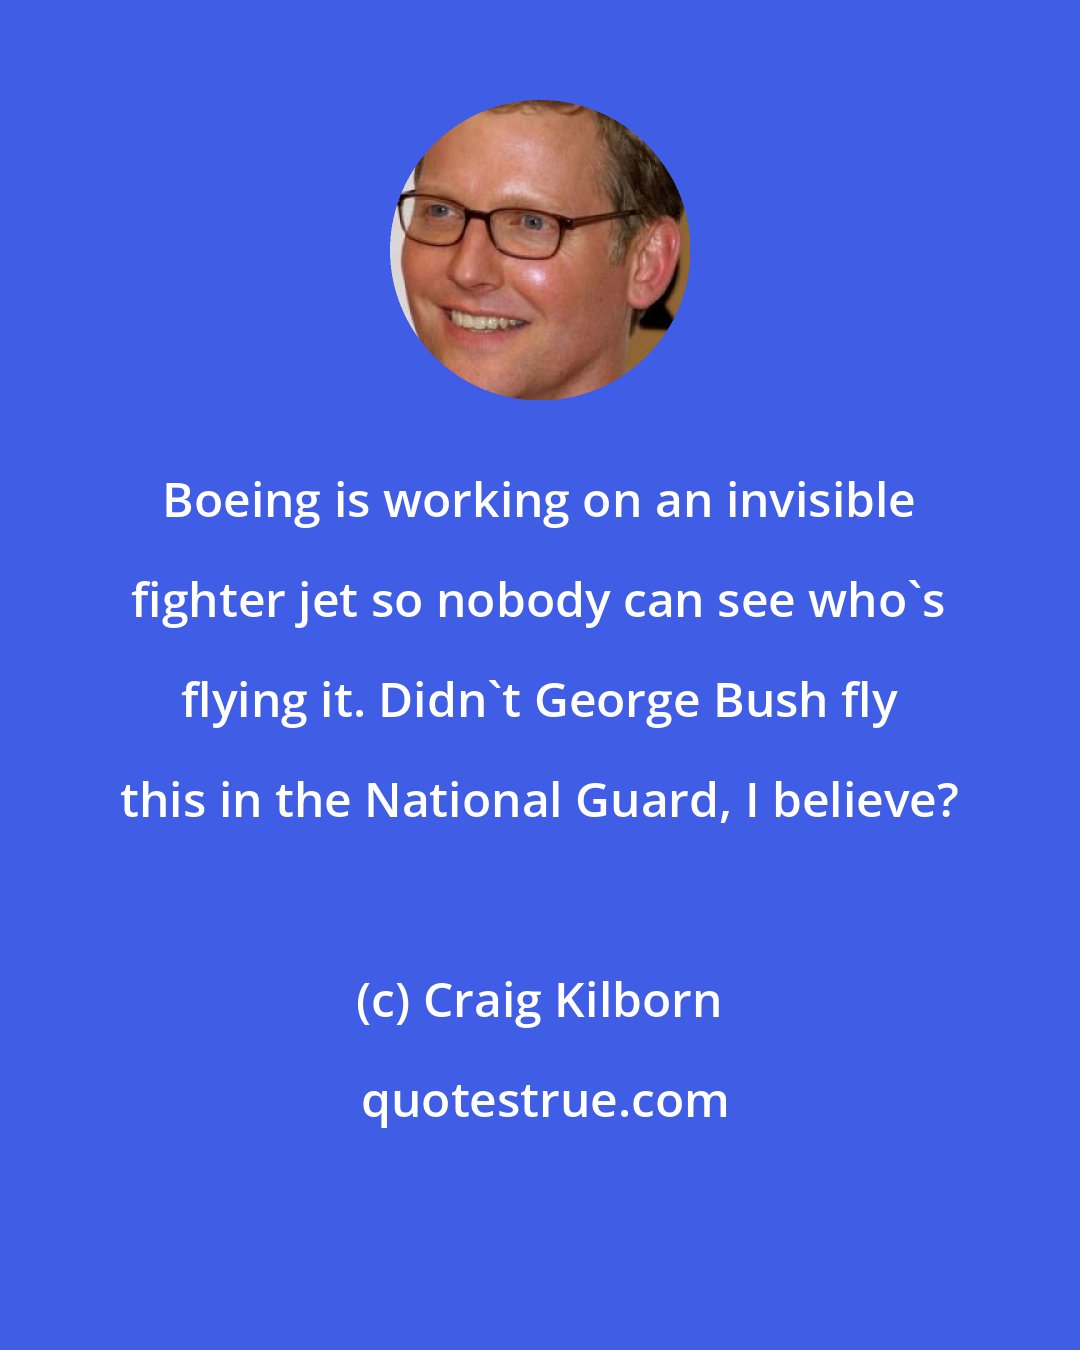 Craig Kilborn: Boeing is working on an invisible fighter jet so nobody can see who's flying it. Didn't George Bush fly this in the National Guard, I believe?